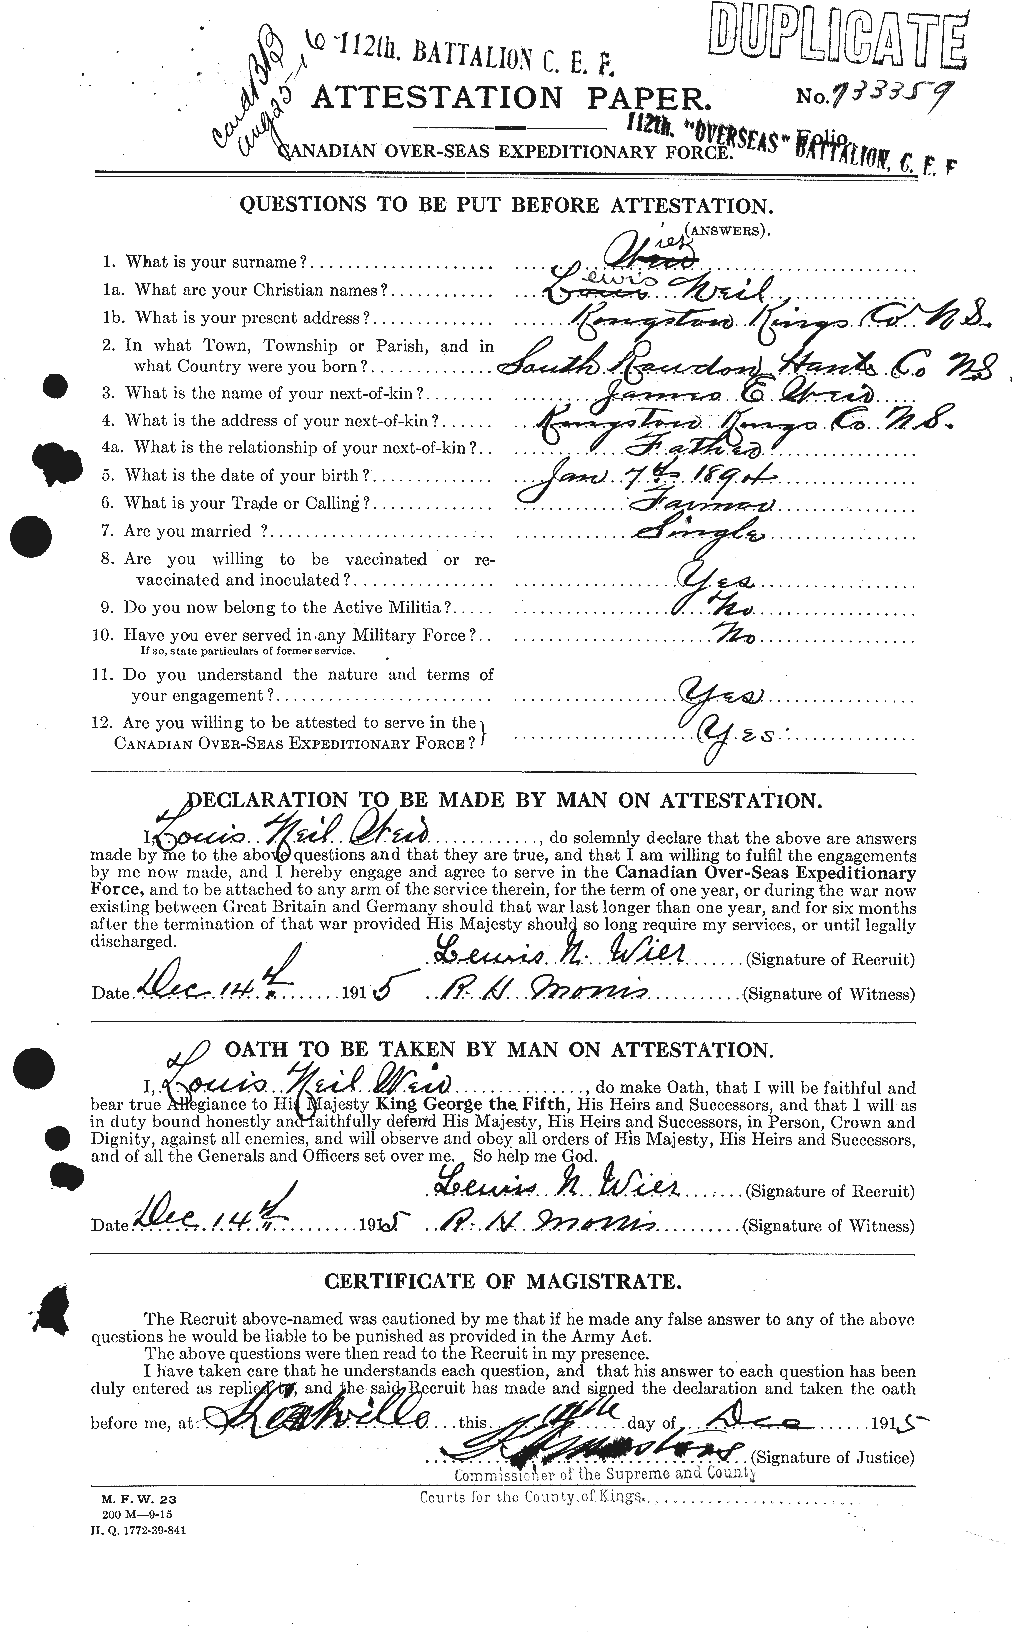 Personnel Records of the First World War - CEF 674167a